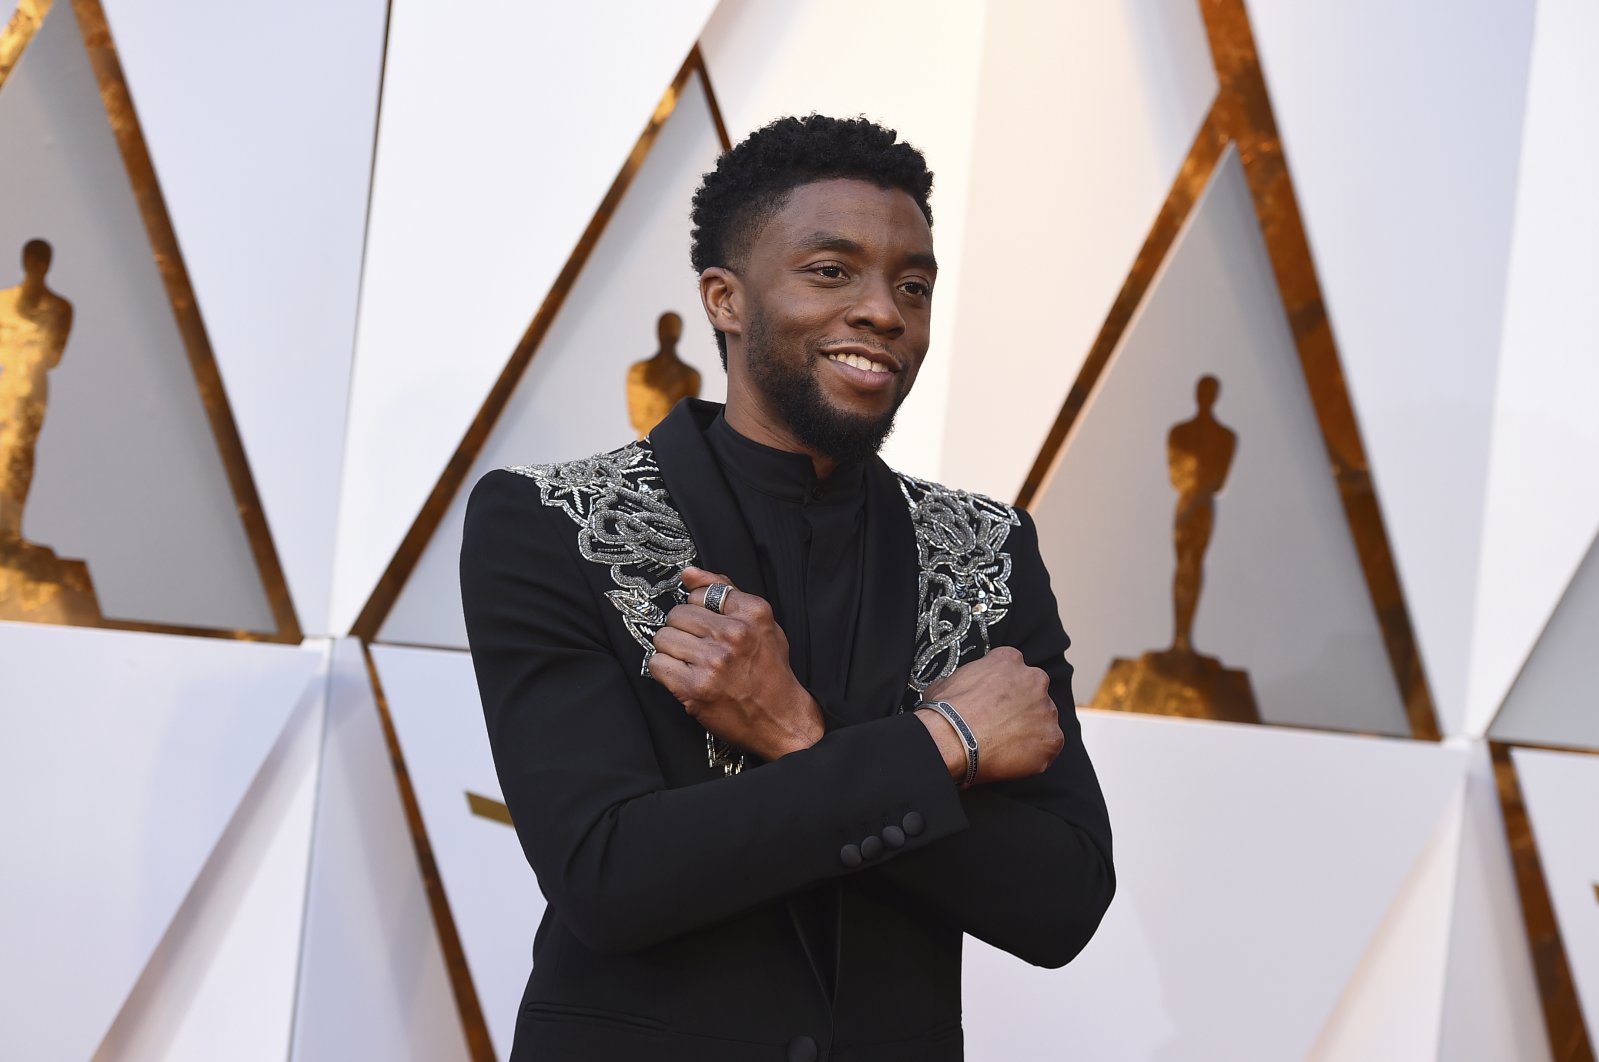 In this March 4, 2018 file photo, Chadwick Boseman arrives at the Oscars at the Dolby Theatre in Los Angeles. (AP Photo)